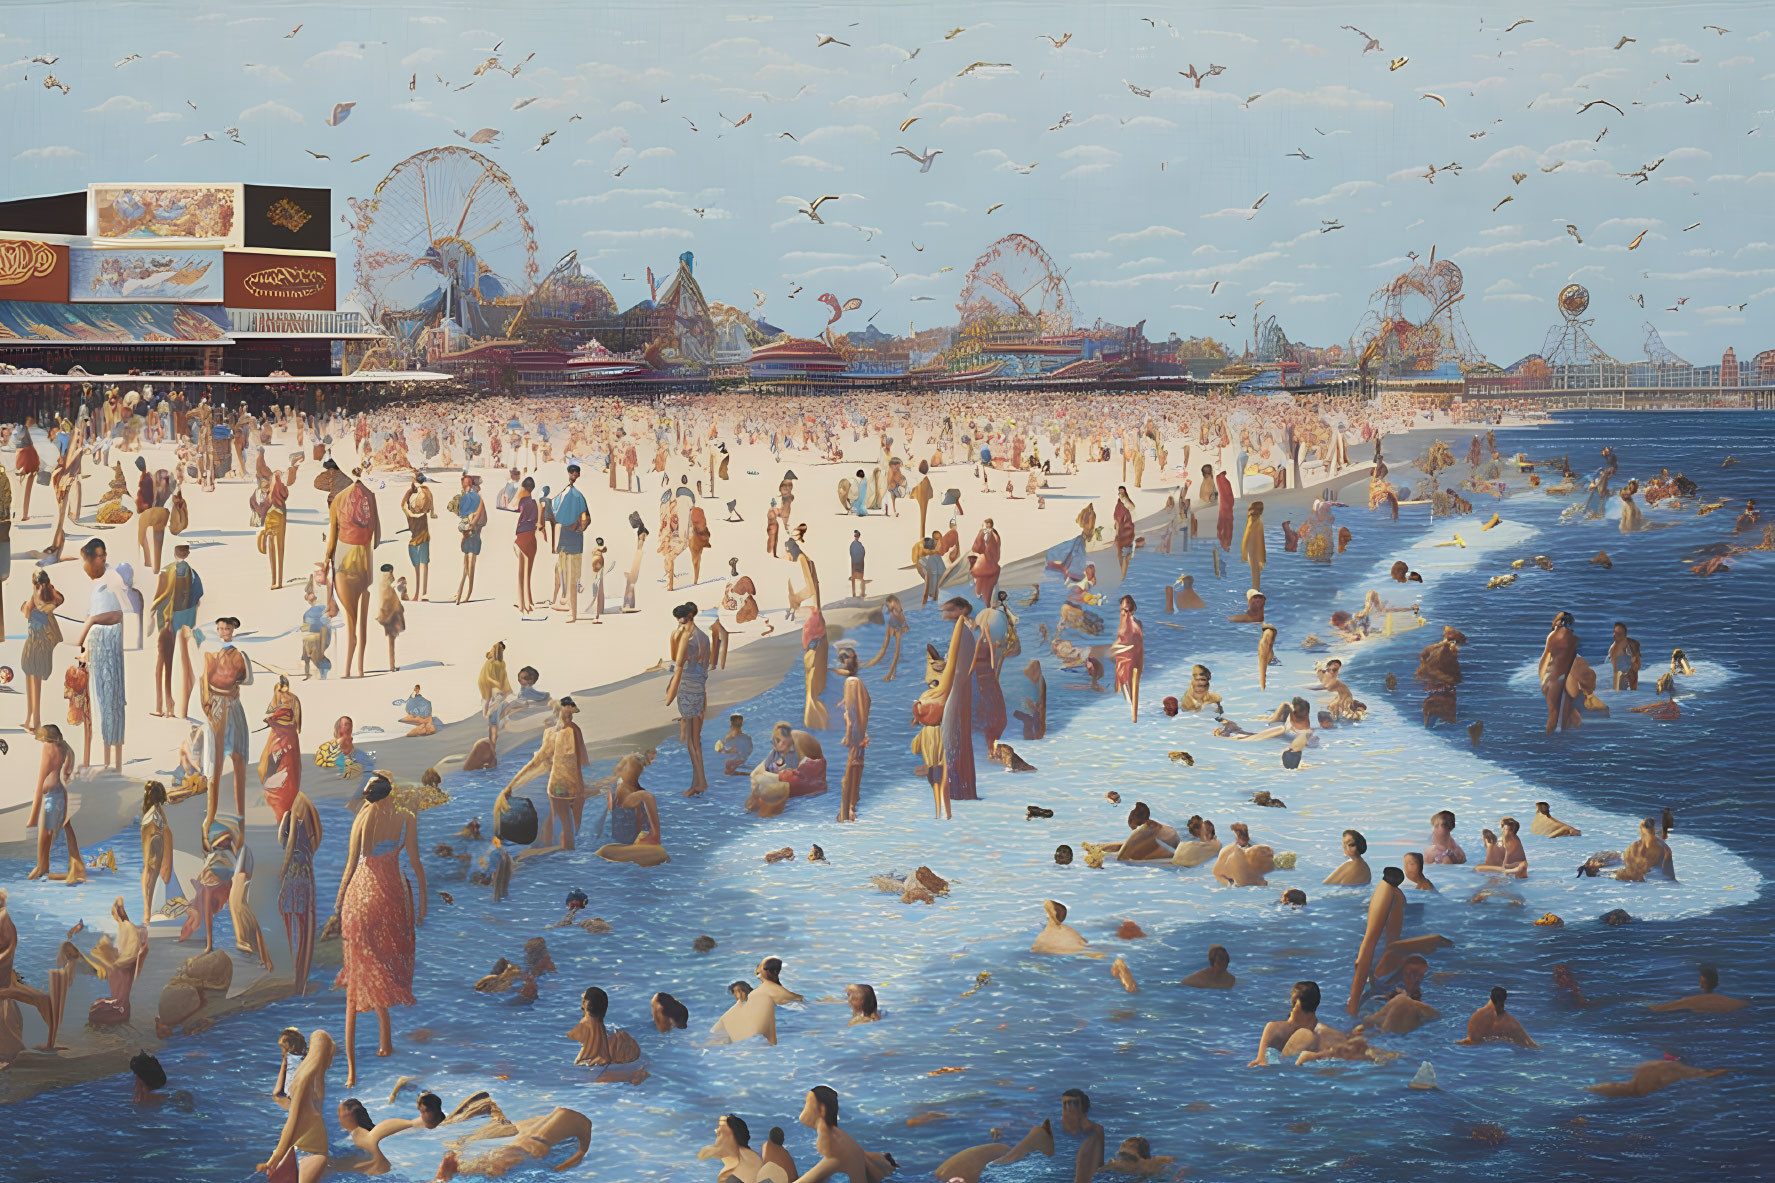 Crowded beach with swimmers and sunbathers, boardwalk with amusement park rides, clear blue